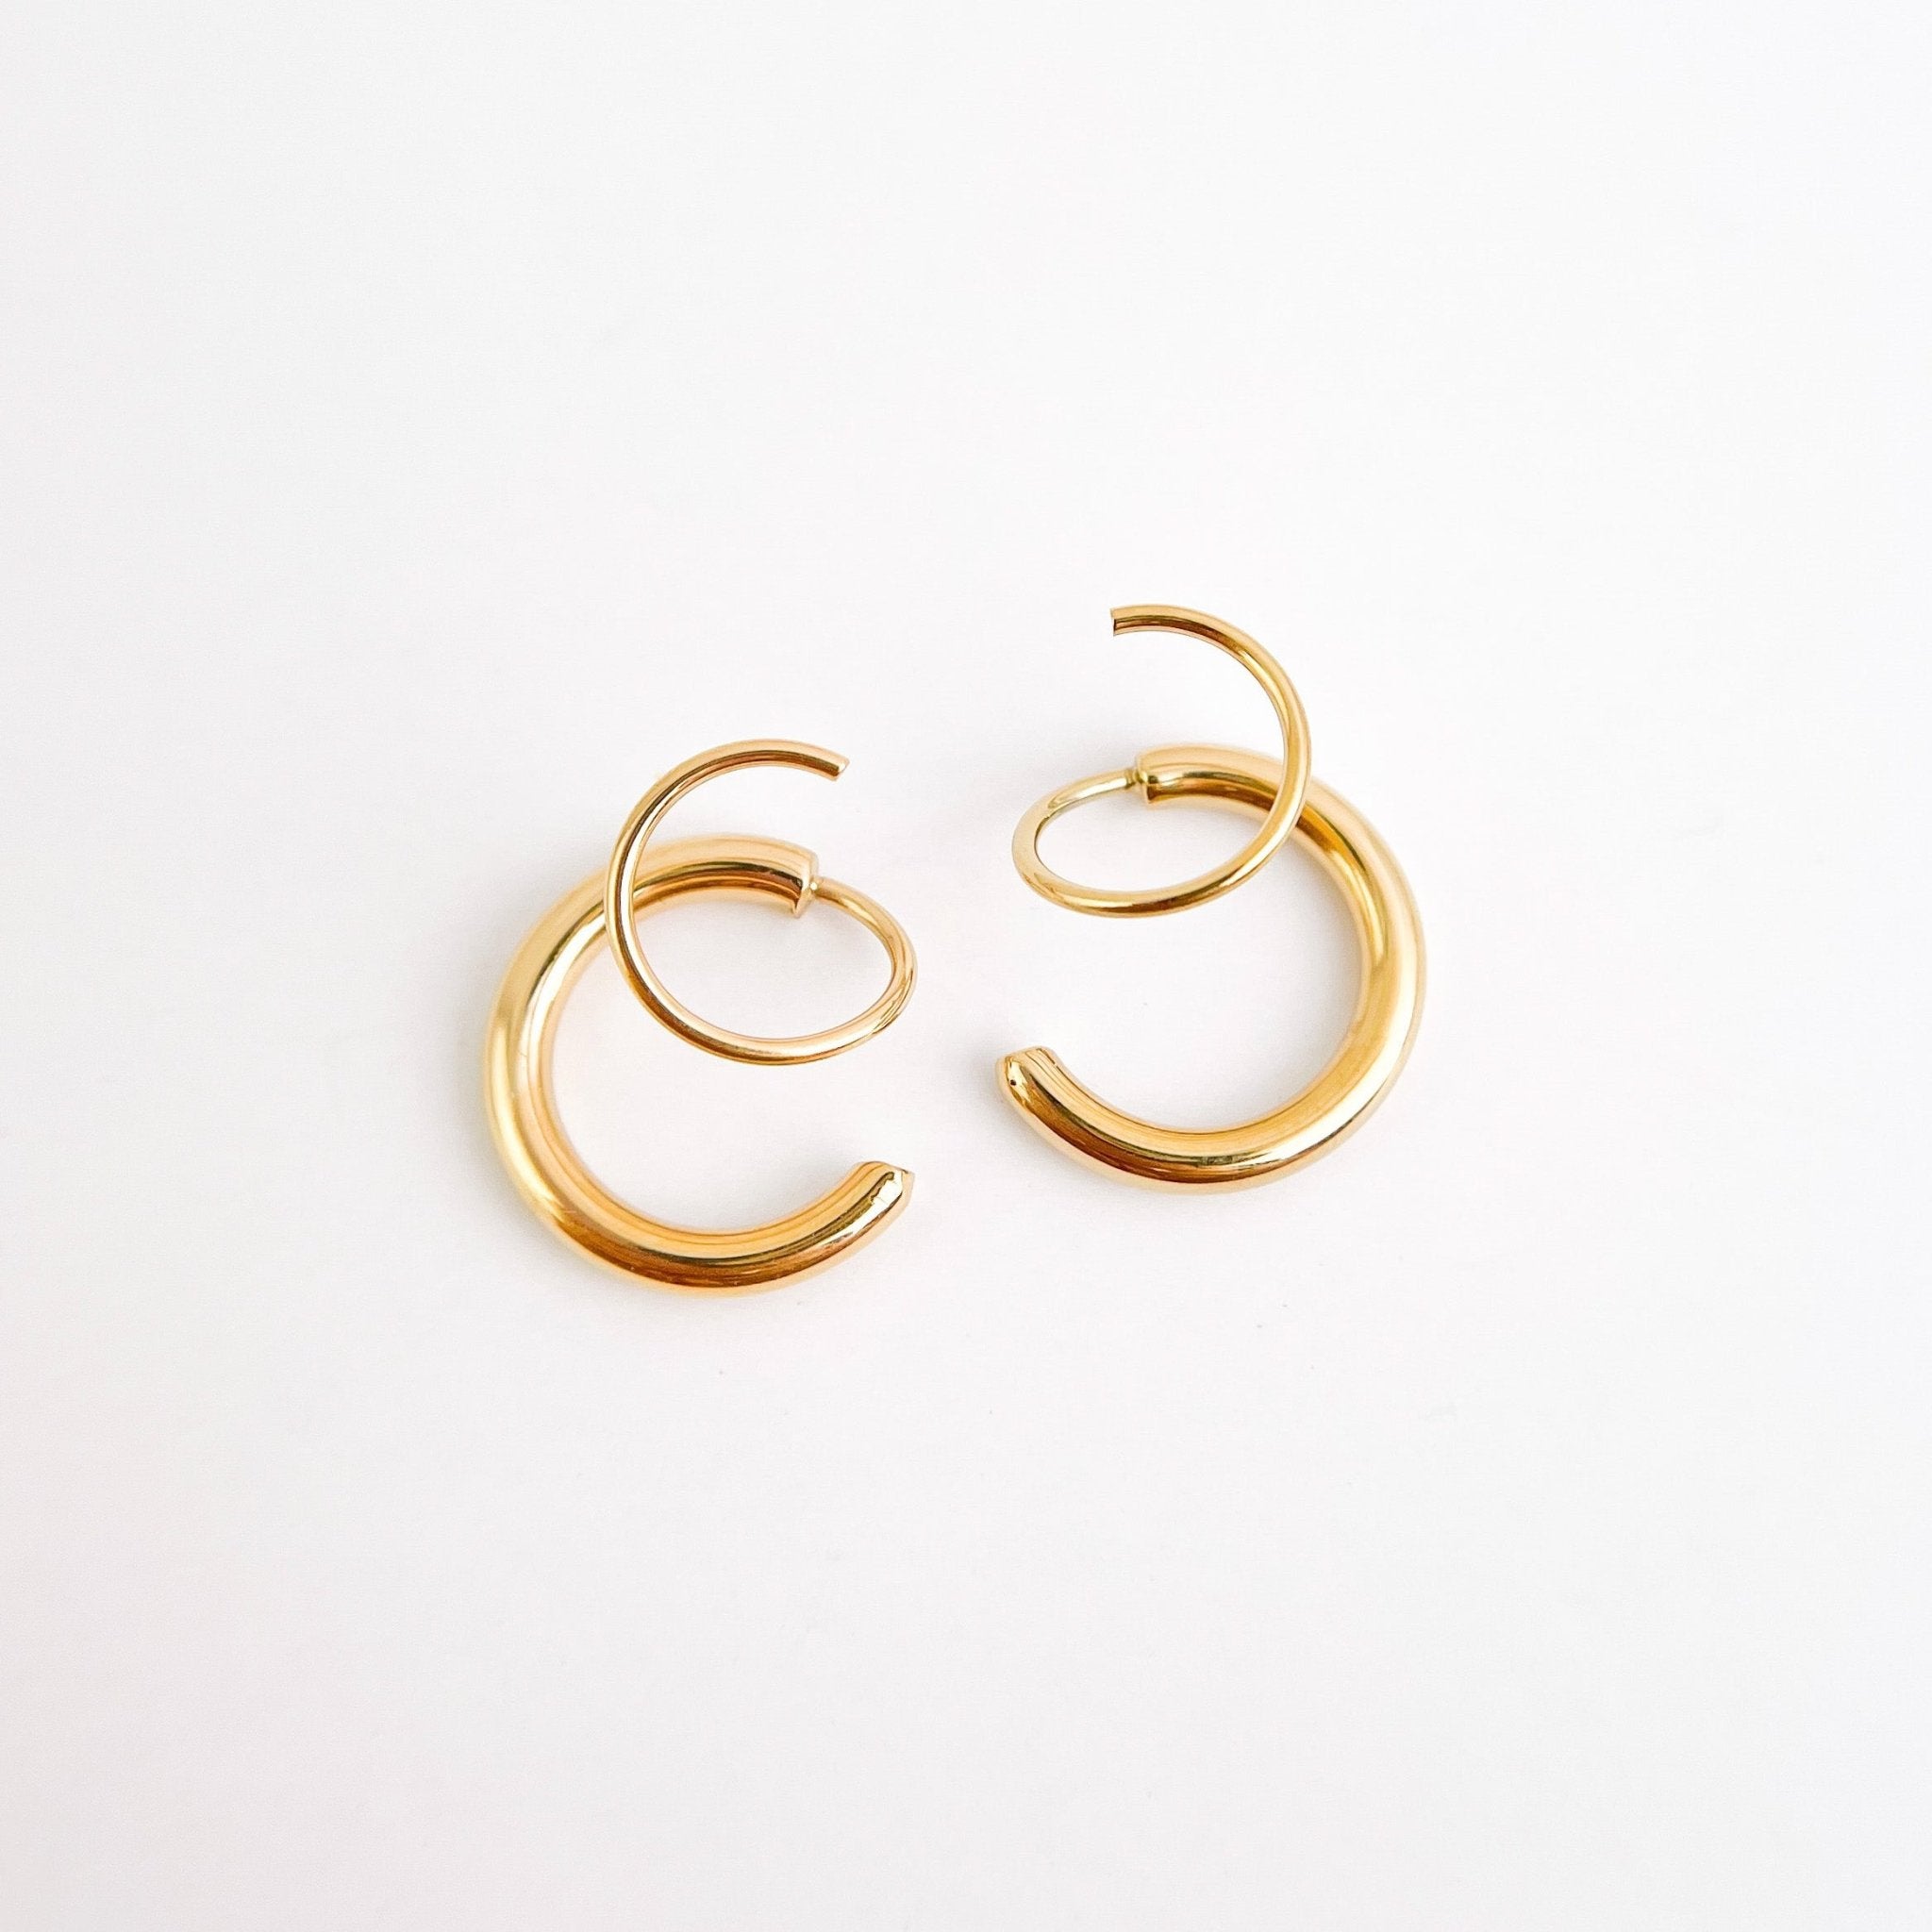 Aria Faux Double Hoop Earrings in Gold - Flaire & Co.